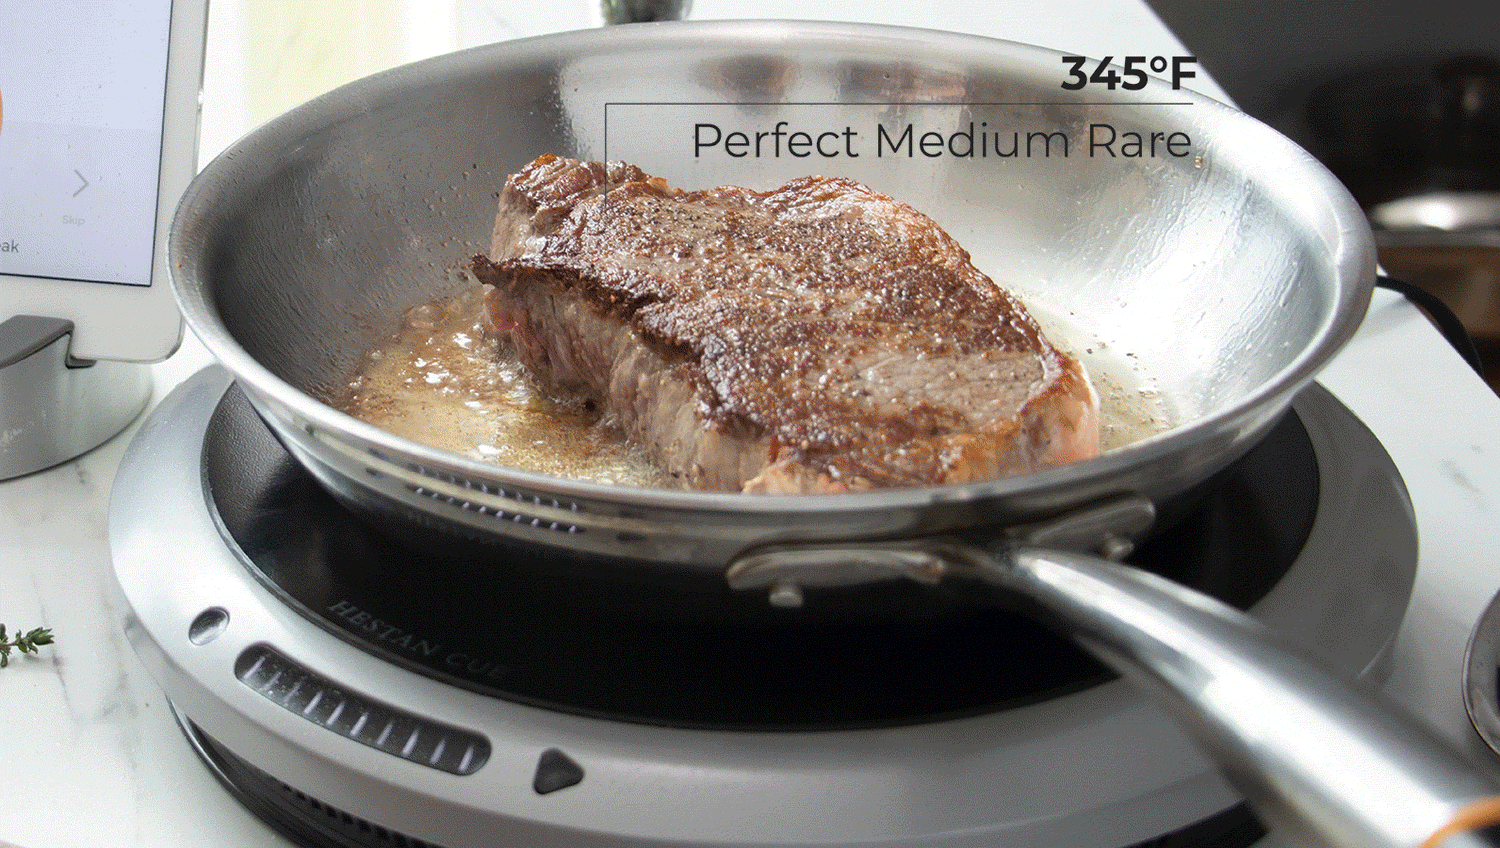 rotating gif image showing different uses of the hestan cue product